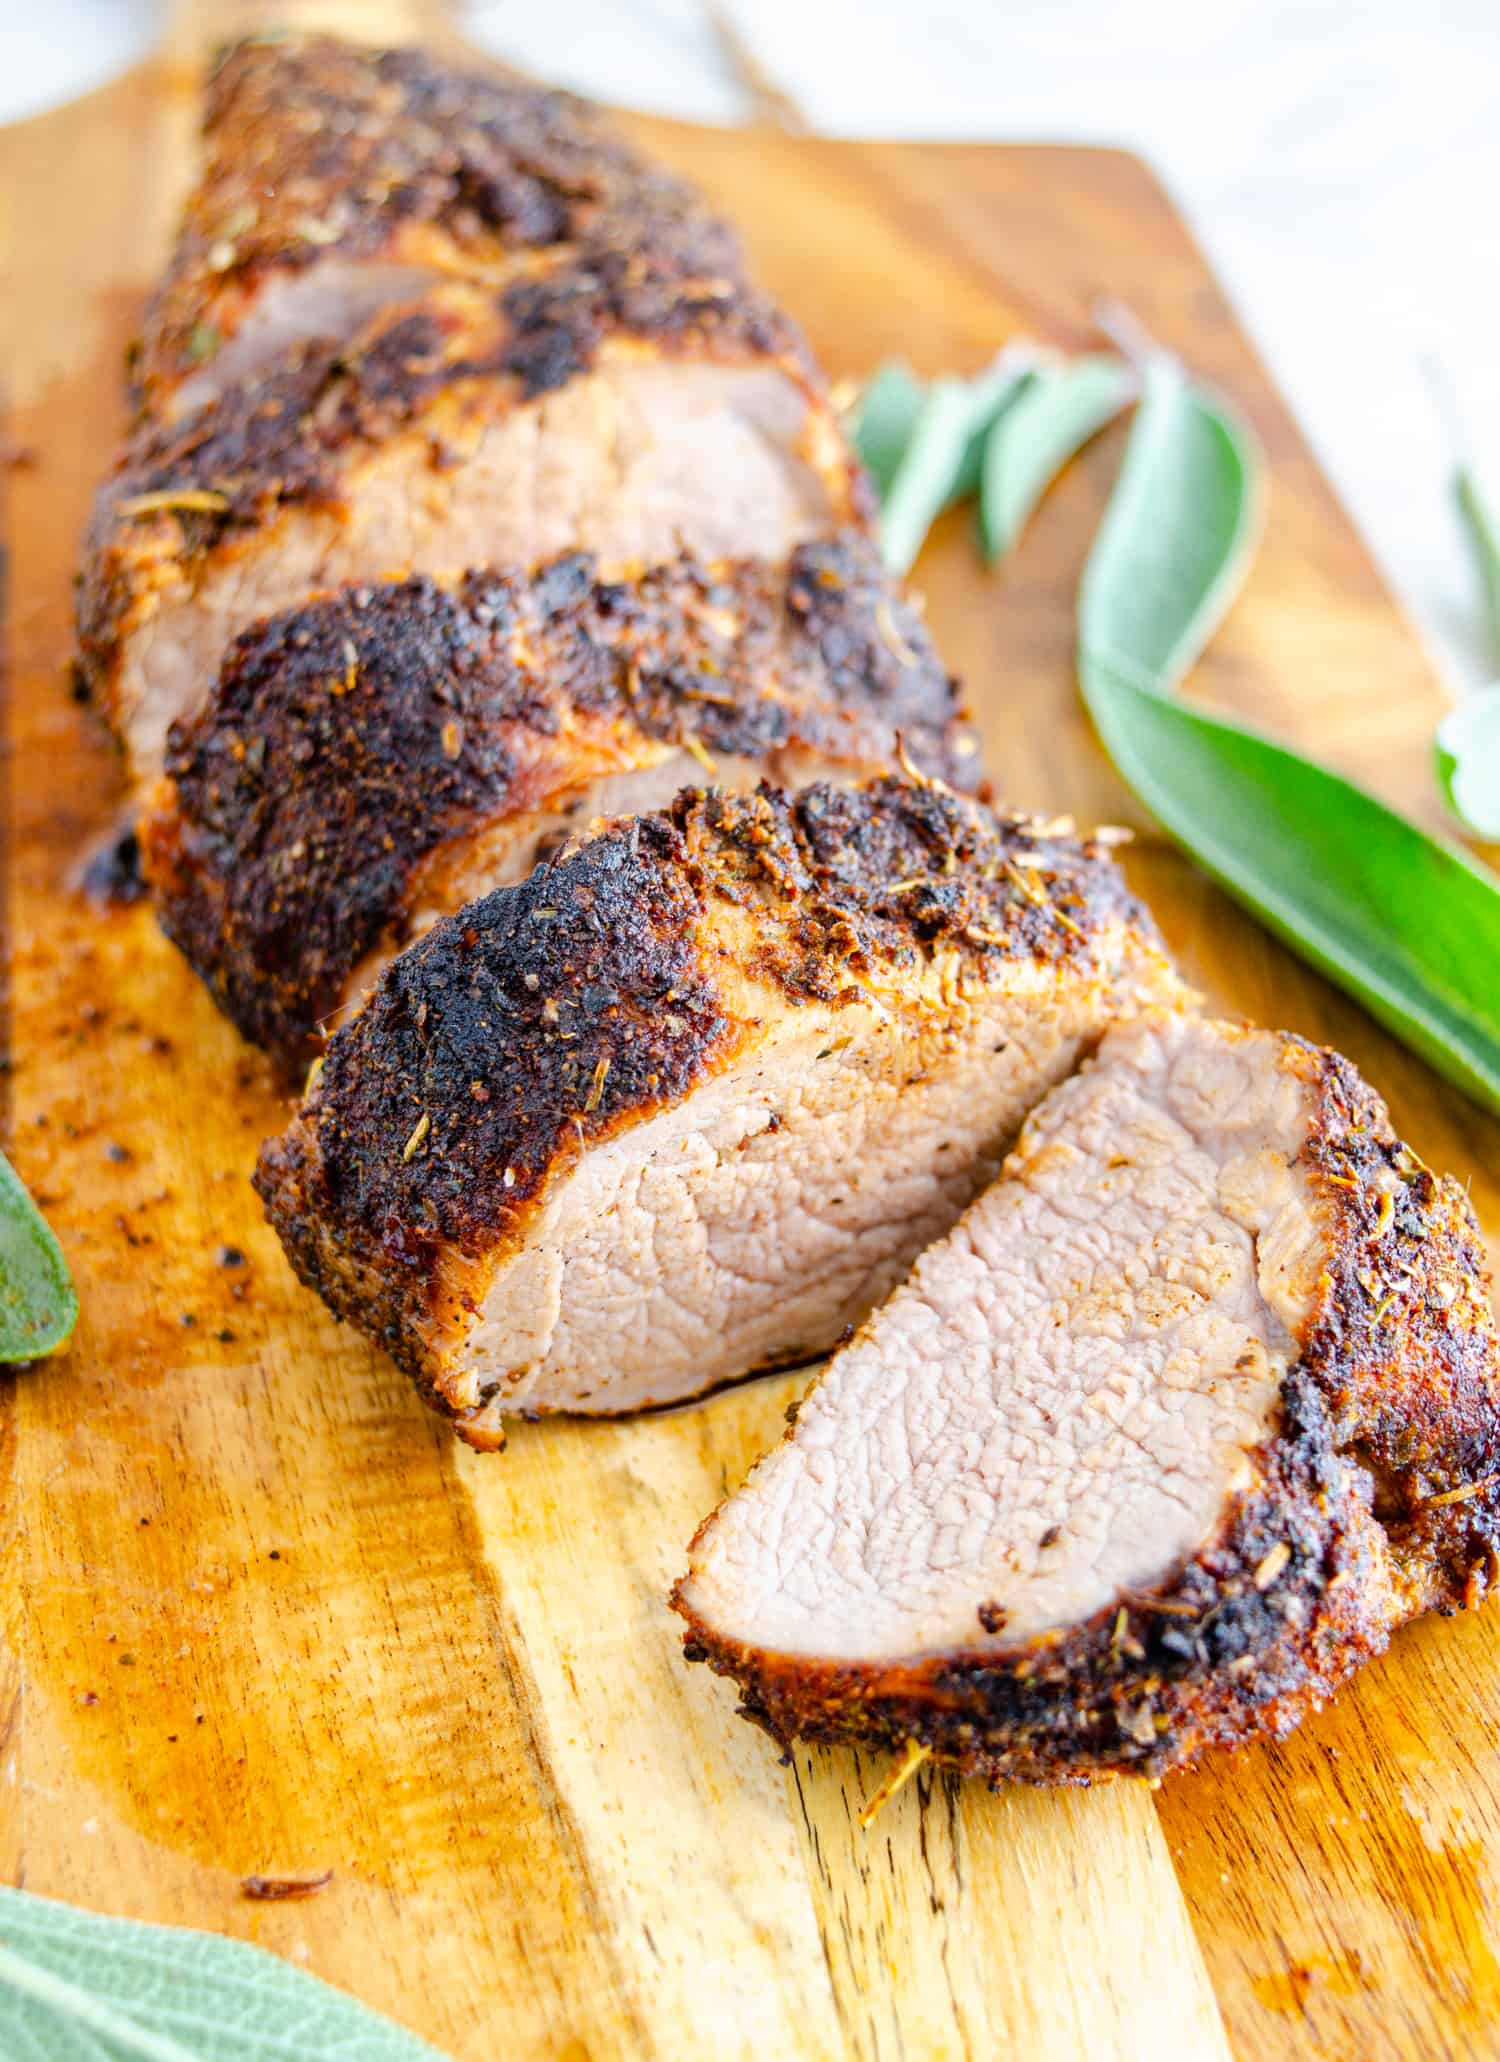 Sliced air fryer pork tenderloin with a caramelized spice rubbed crust on a wooden cutting board.